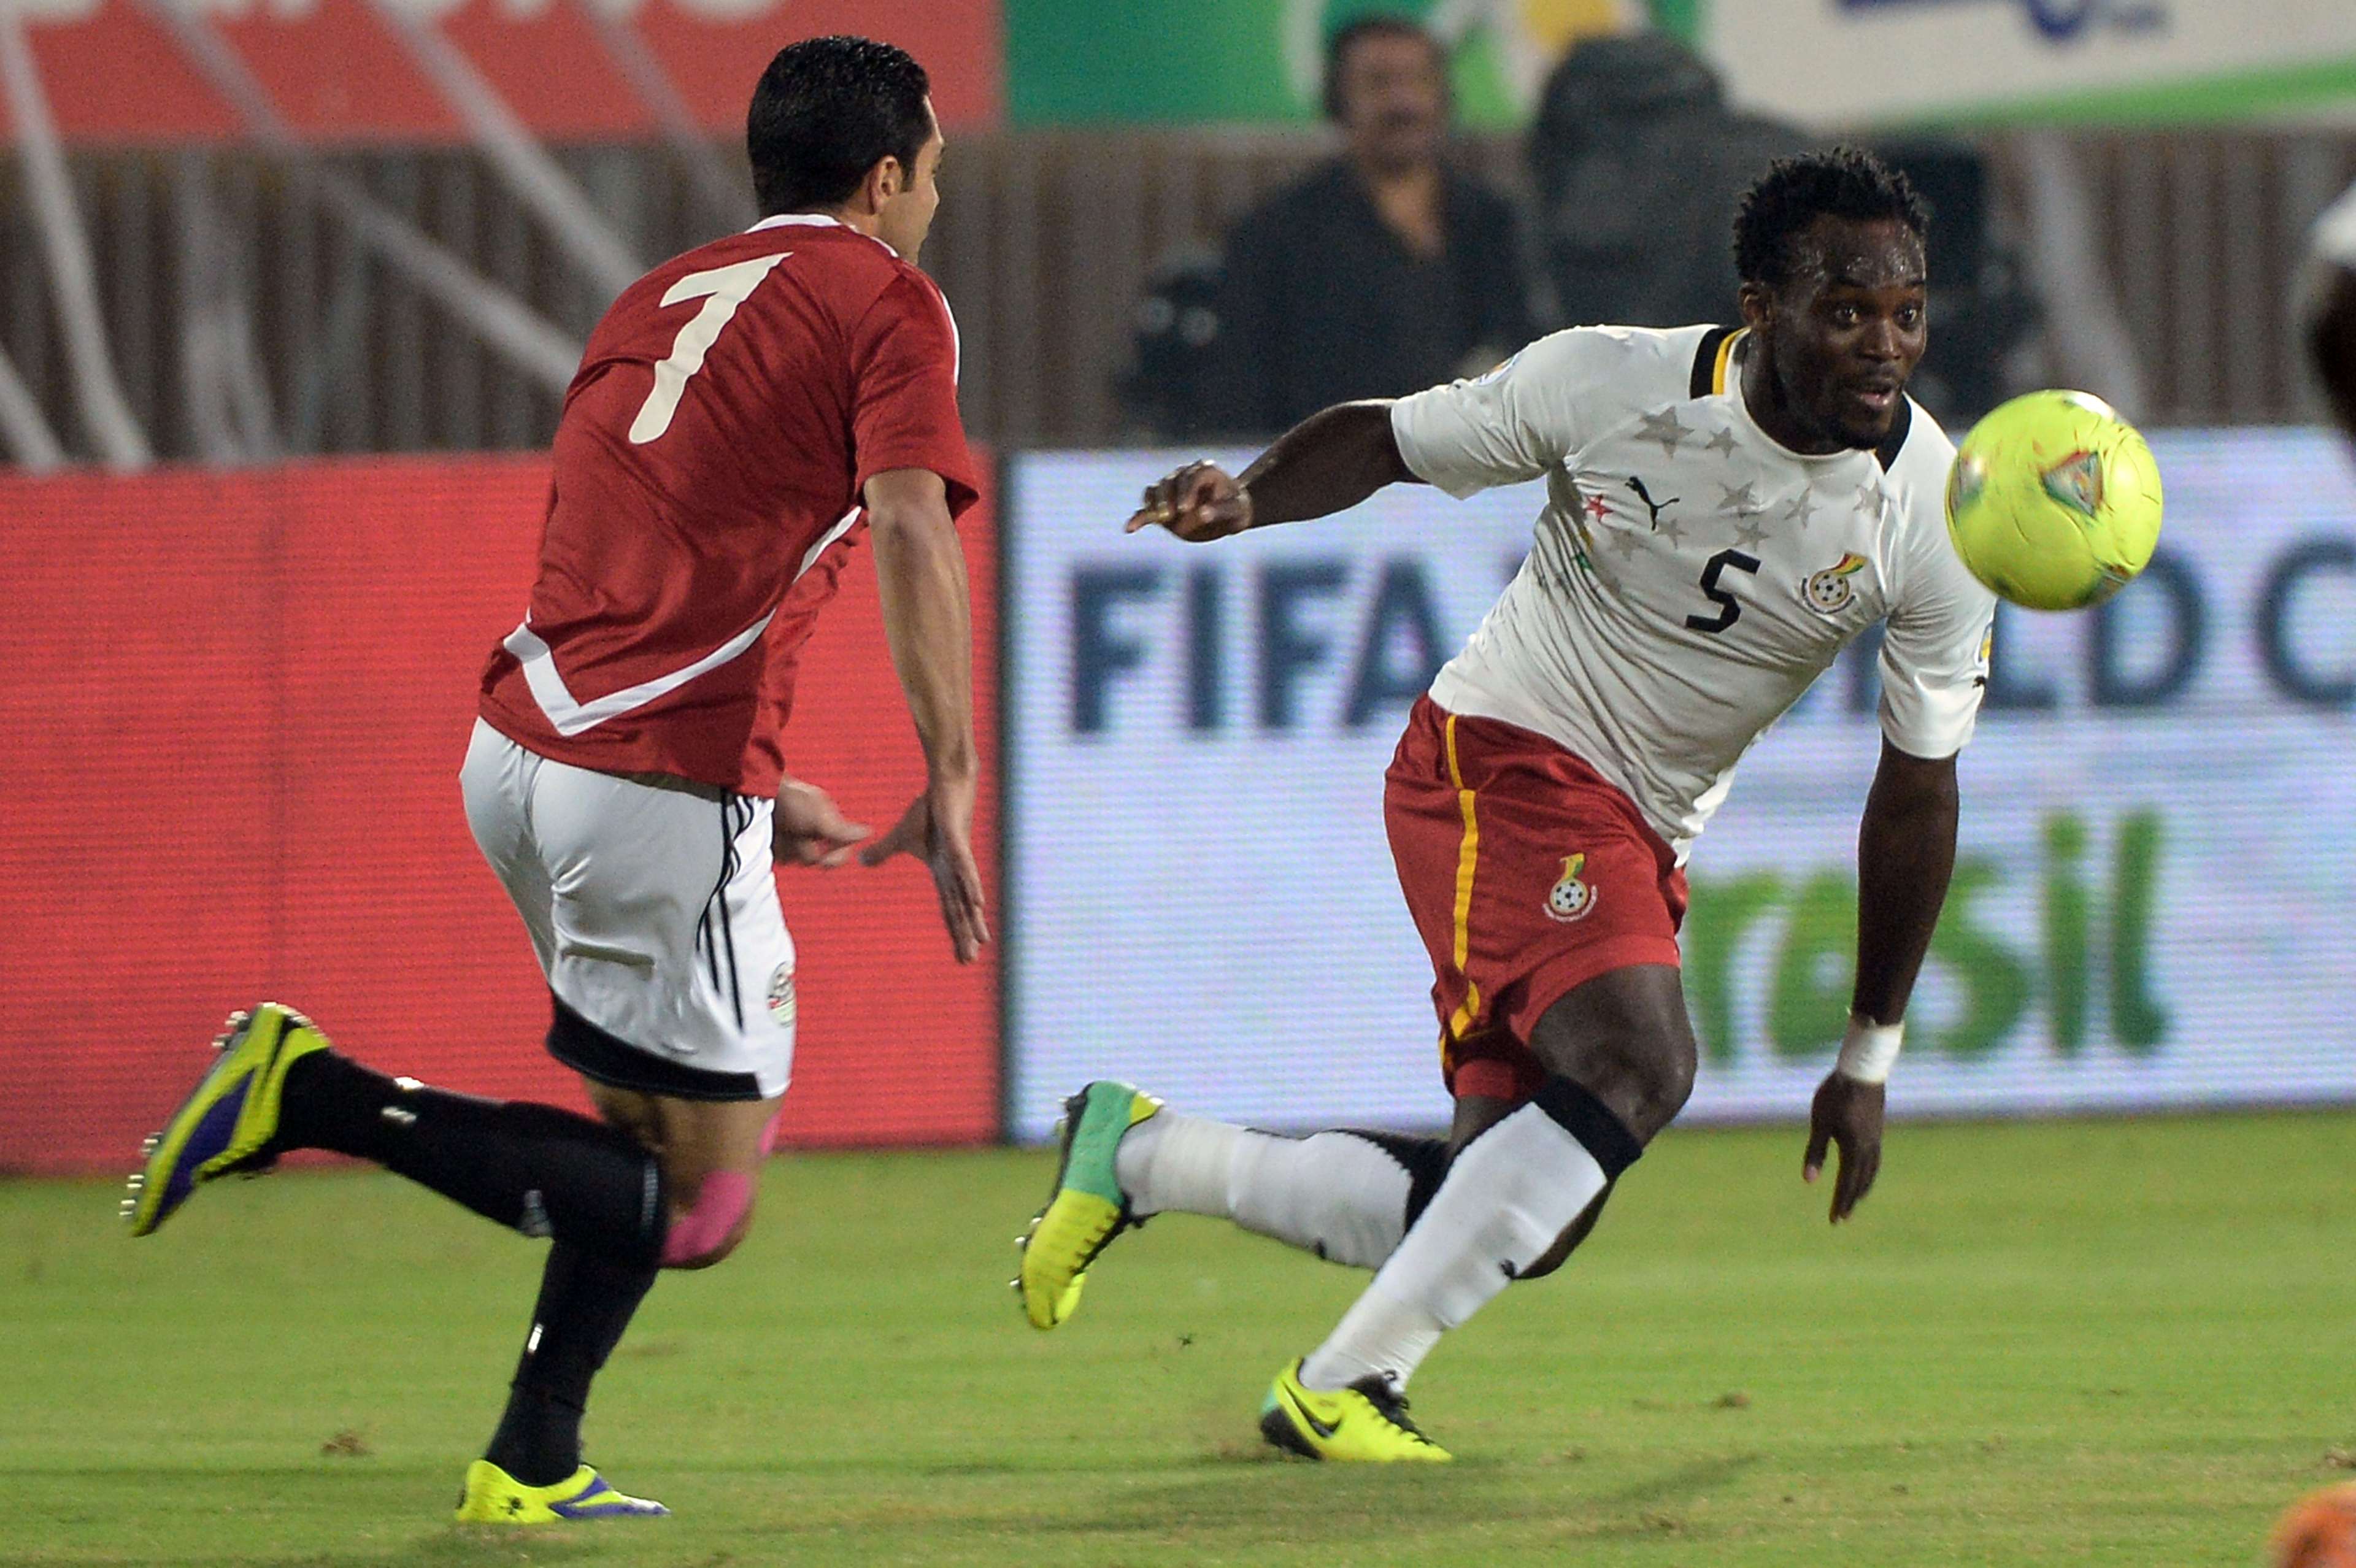 Ahmed Fathy and Michael Essien Ghanas Vs Egypt WC2014 African zone qualifier second leg play-off